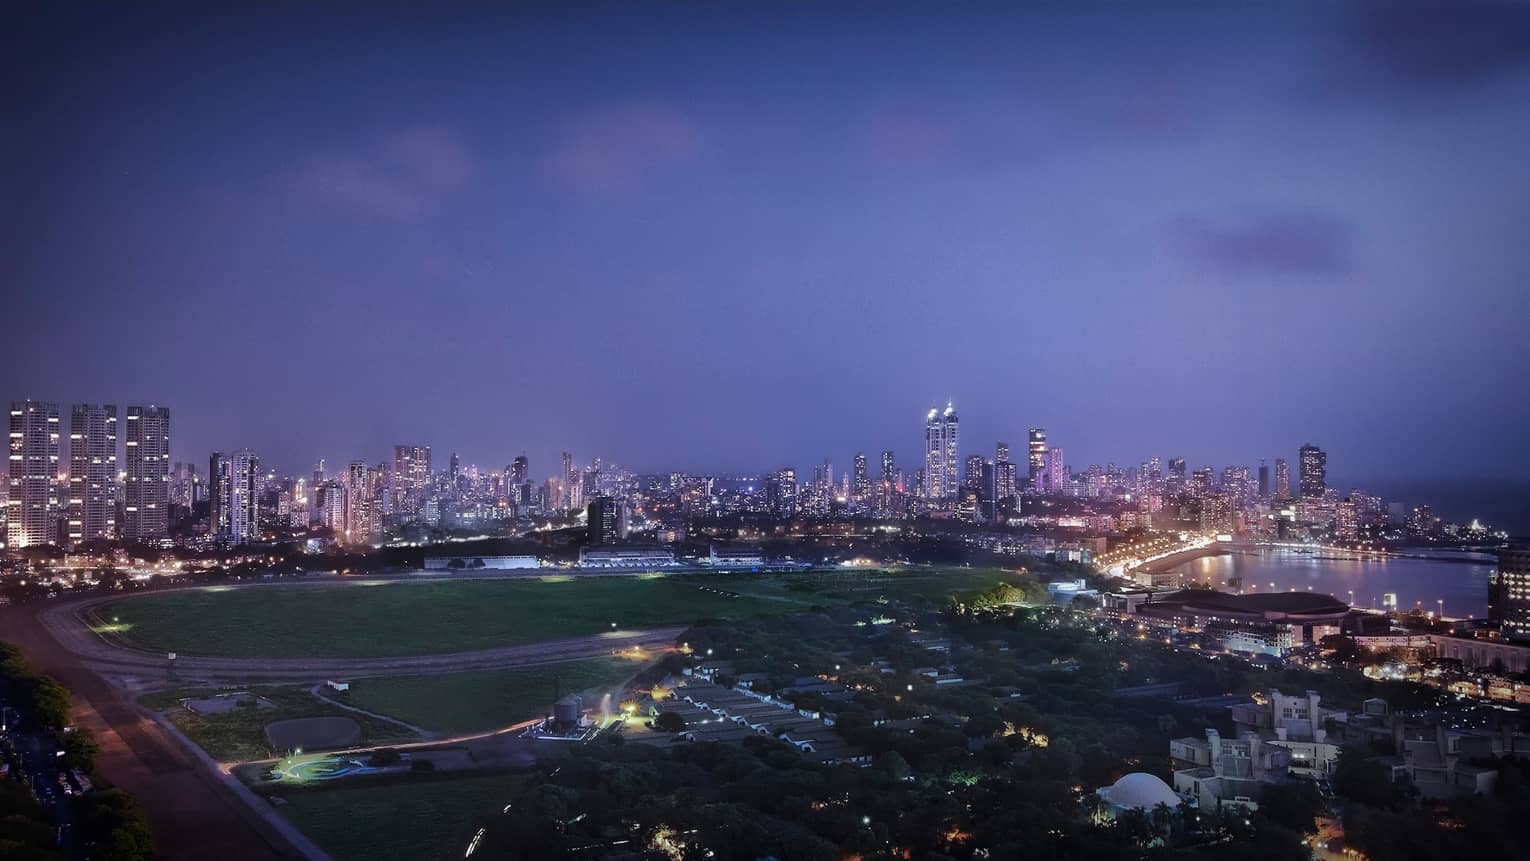 View over large field, track, Mumbai city skyline with buildings, lights at dusk